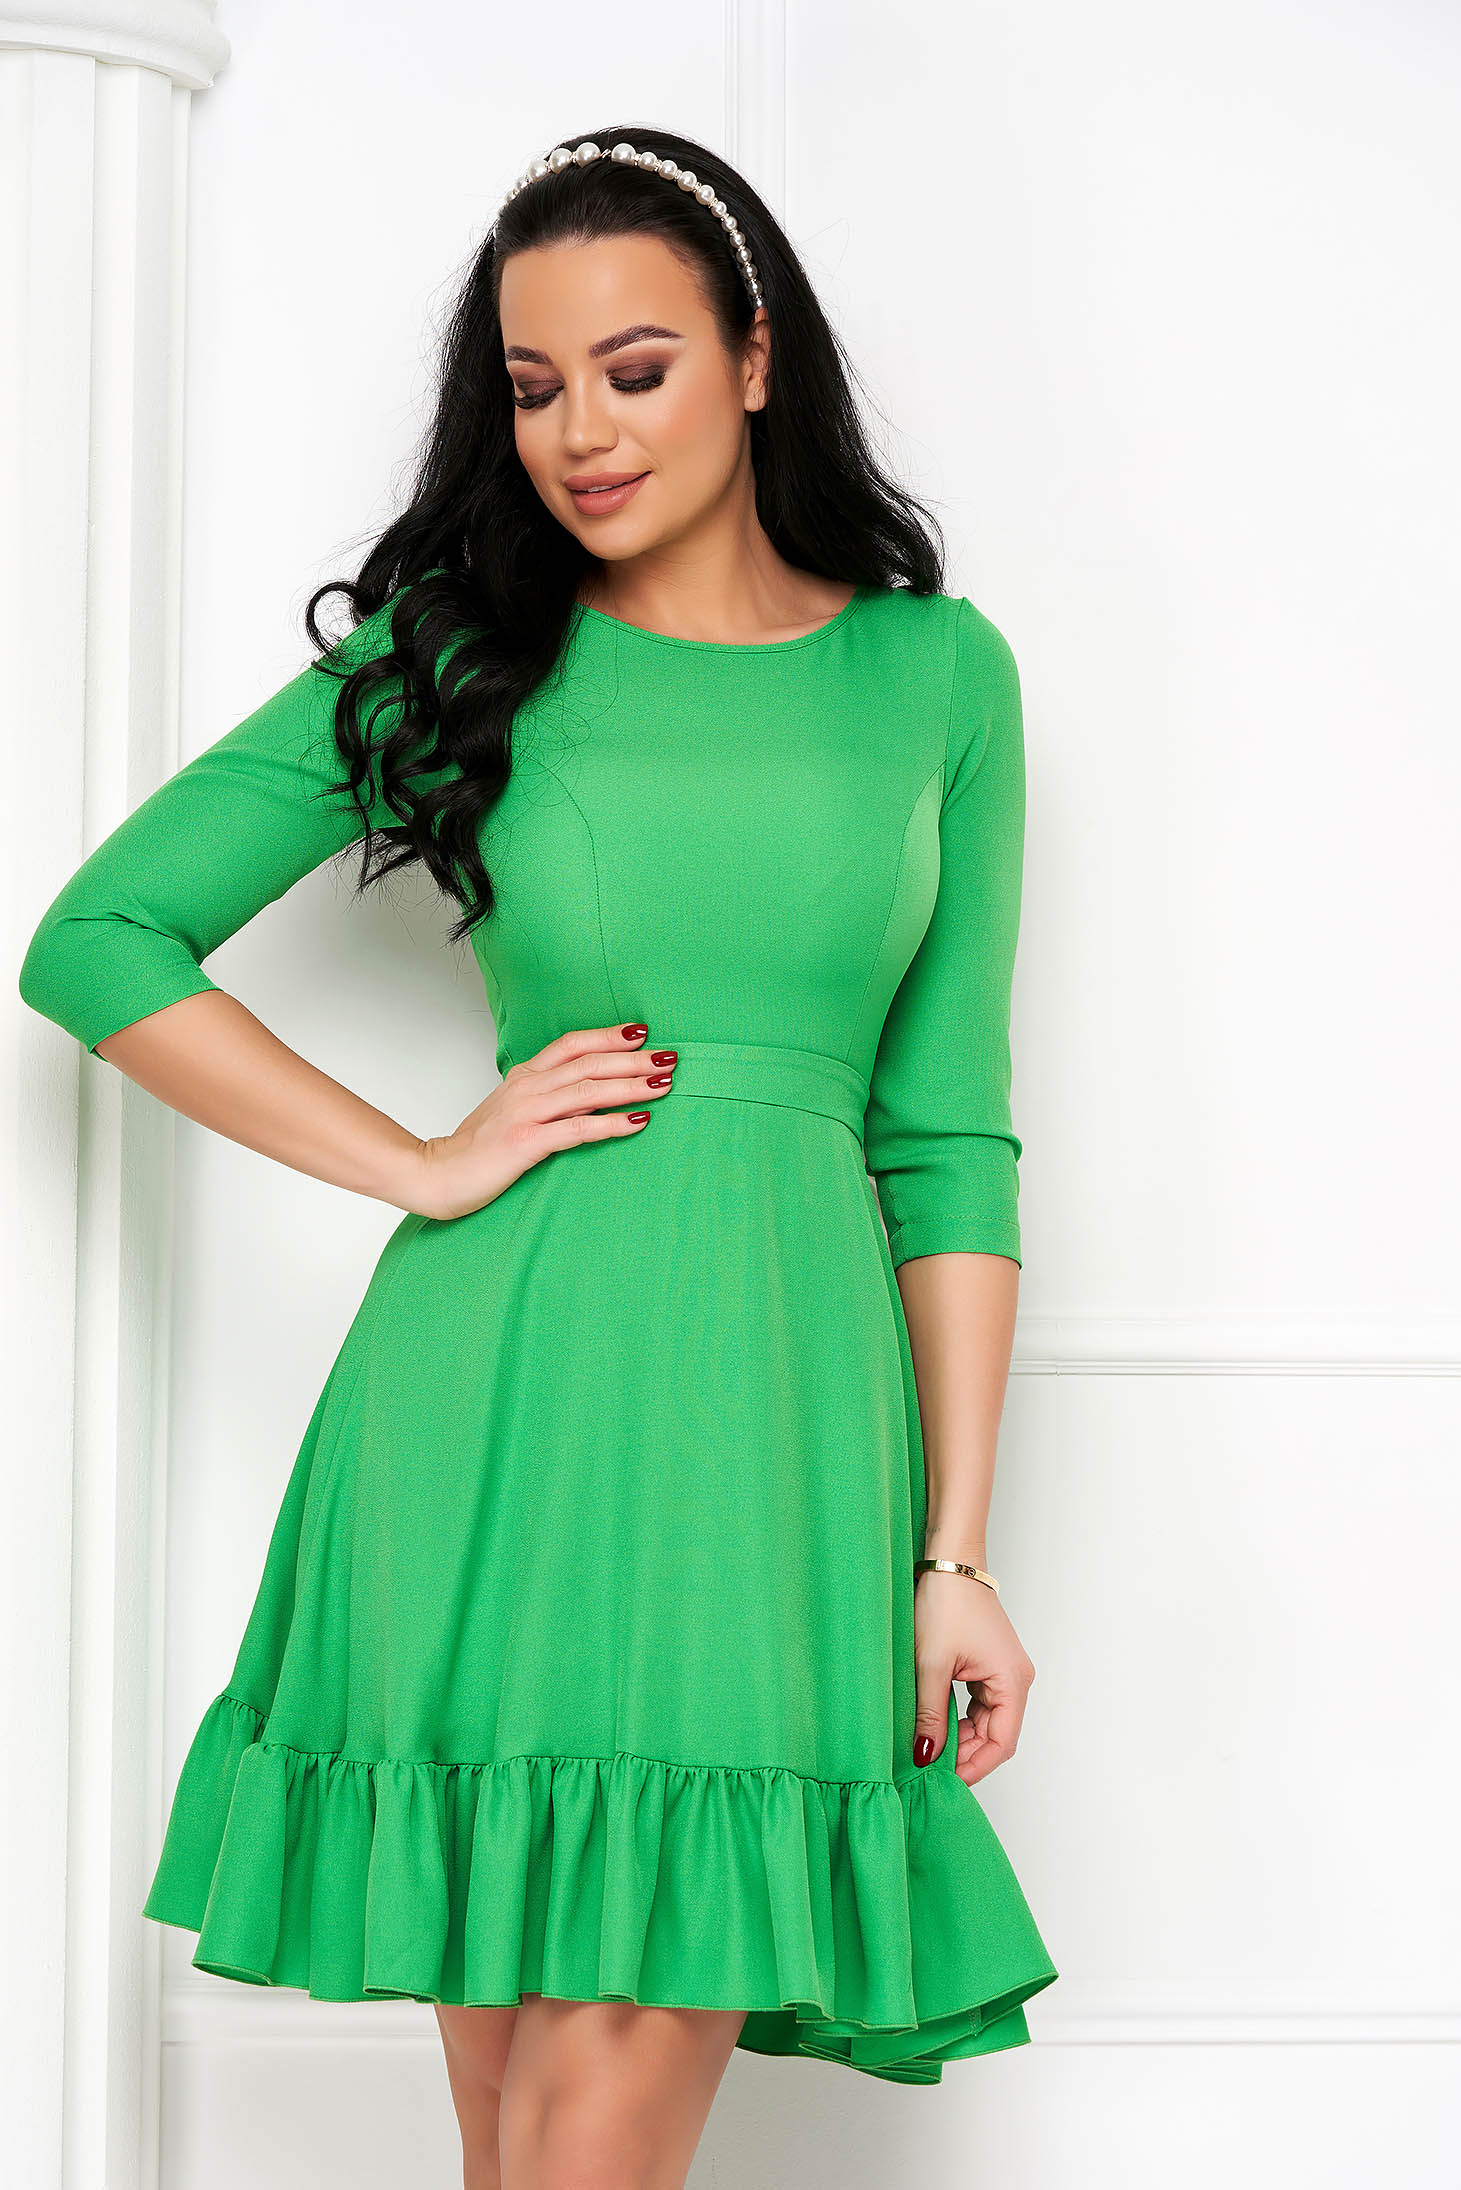 Georgette Dress with Light Green Graining Short in Flared with Rounded Neckline - StarShinerS 1 - StarShinerS.com